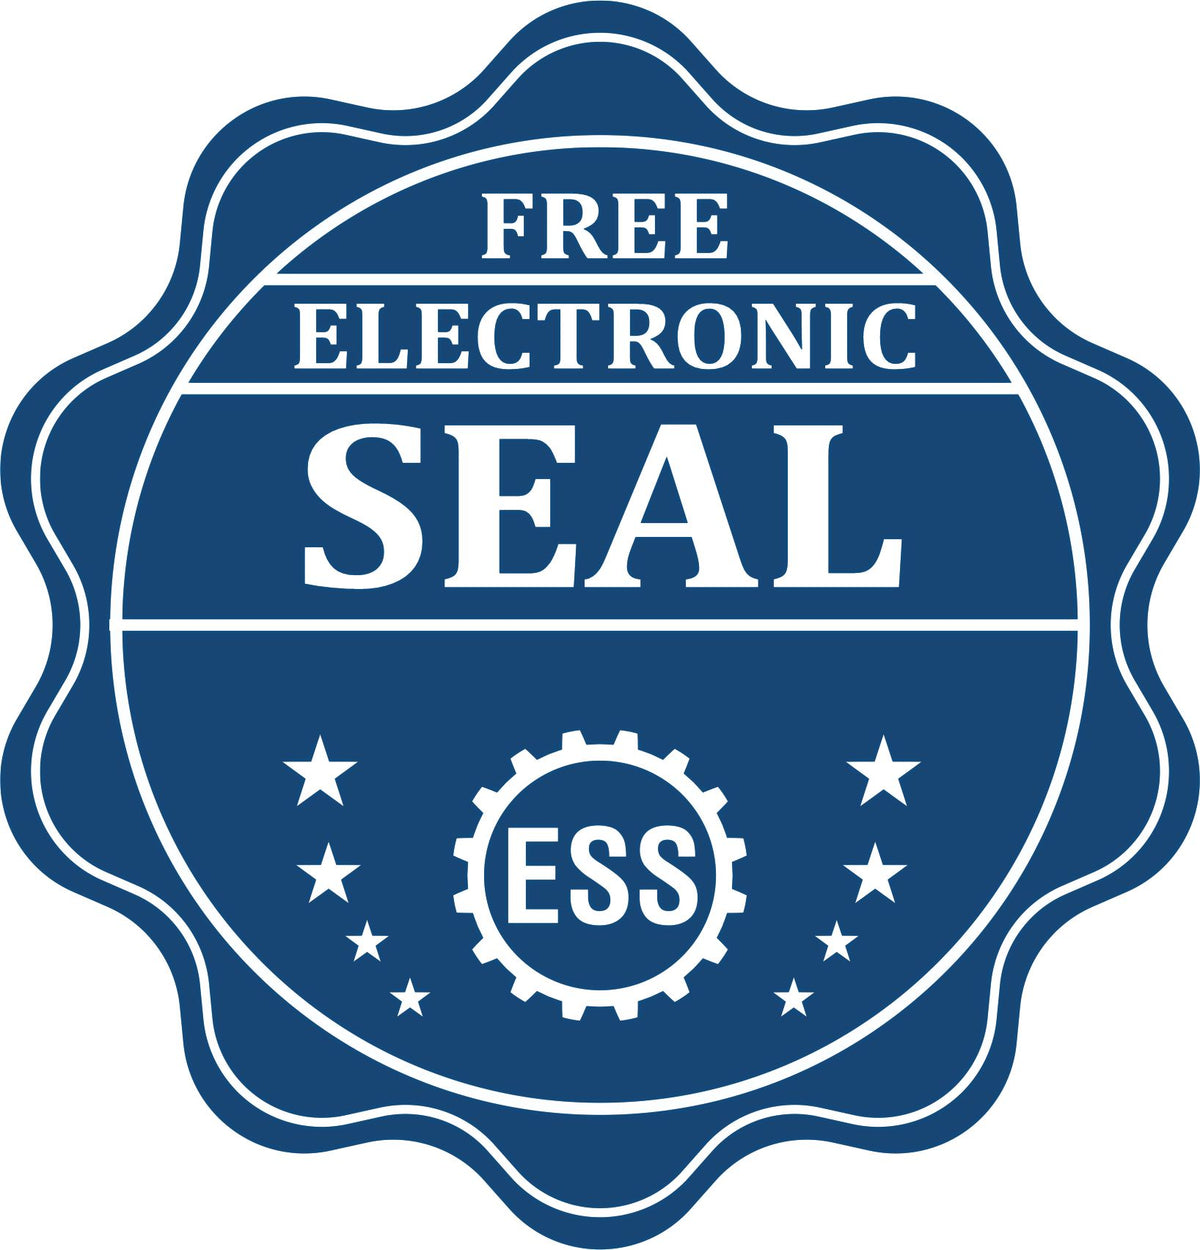 A badge showing a free electronic seal for the Extended Long Reach Georgia Surveyor Embosser with stars and the ESS gear on the emblem.